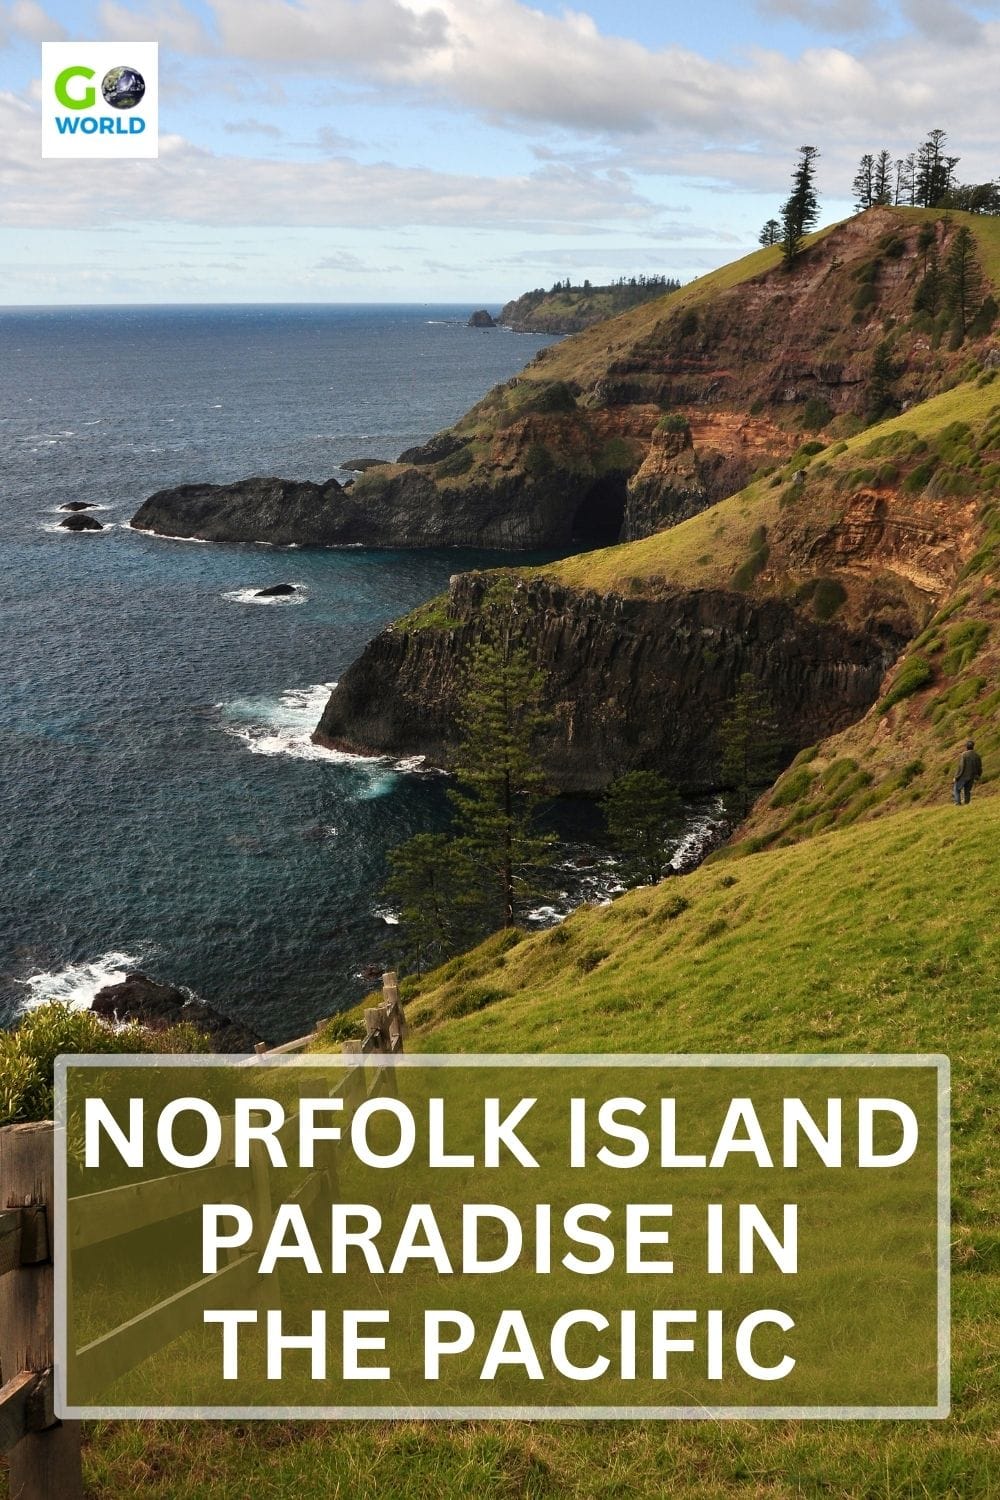 Tiny Norfolk Island in the South Pacific is an underated place of historic importance, natural wonders, wildlife and adventure. #norfolkisland 